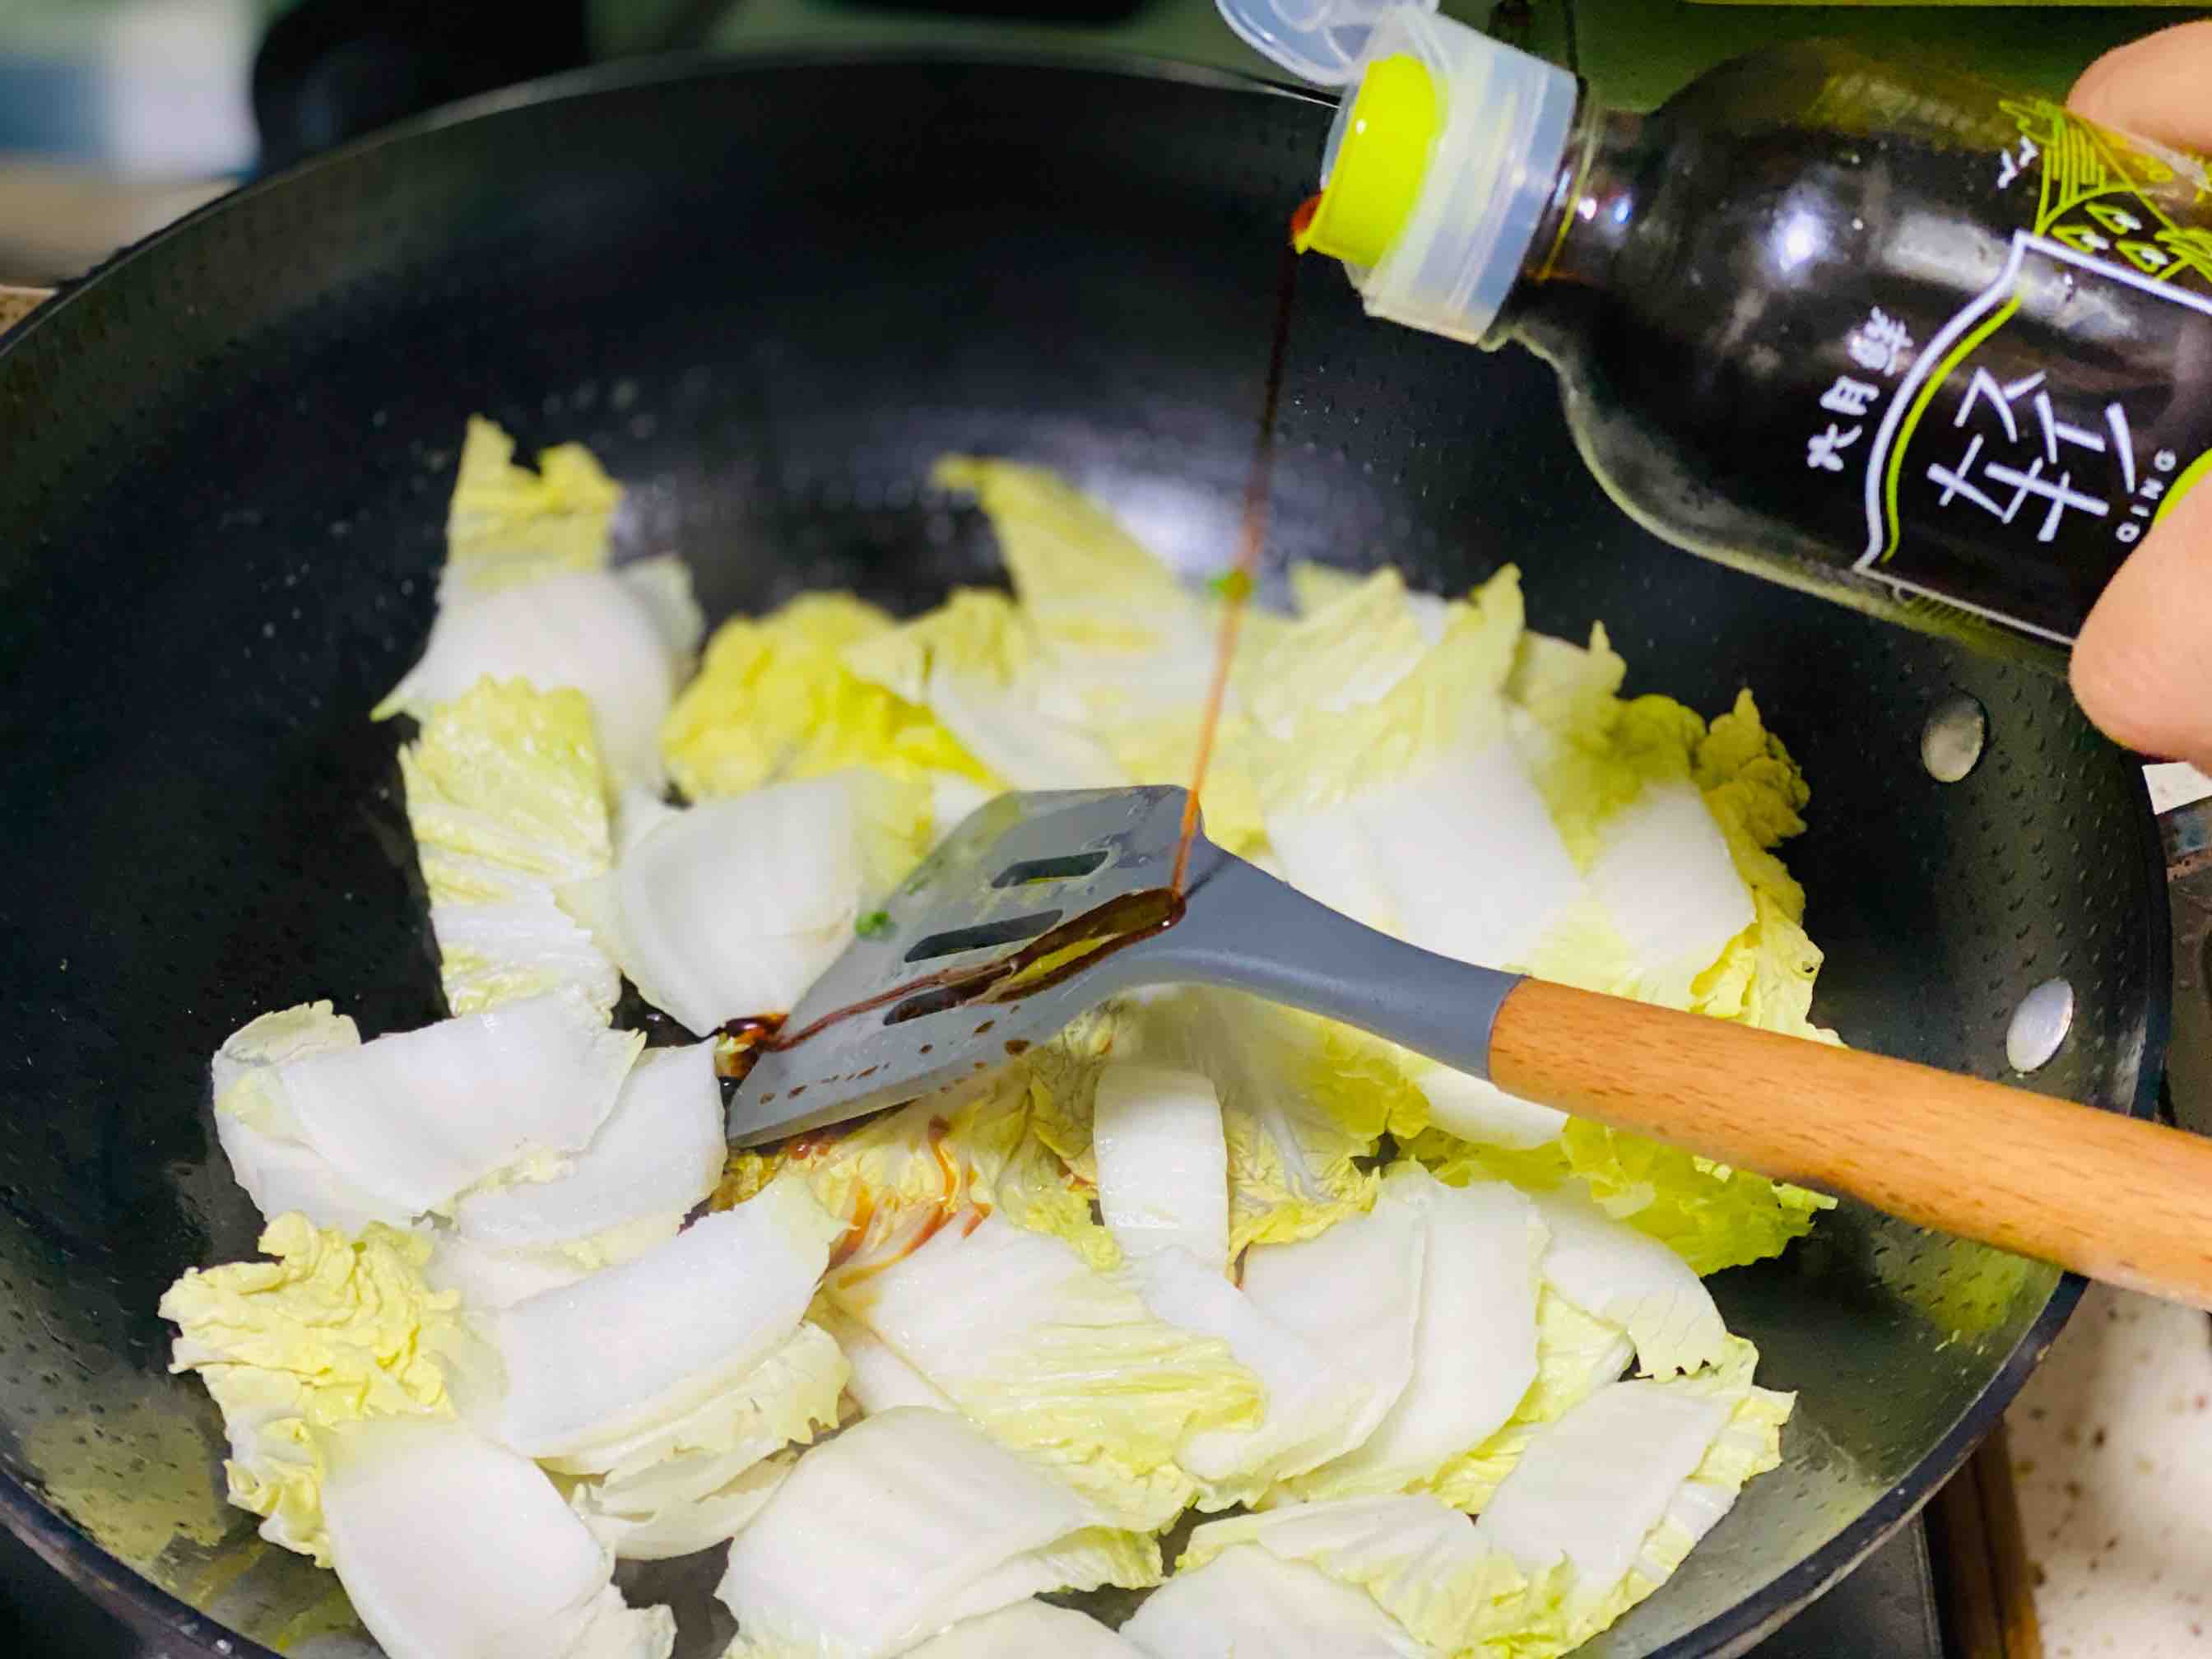 Stir-fried Cabbage with Tofu in Soy Sauce recipe